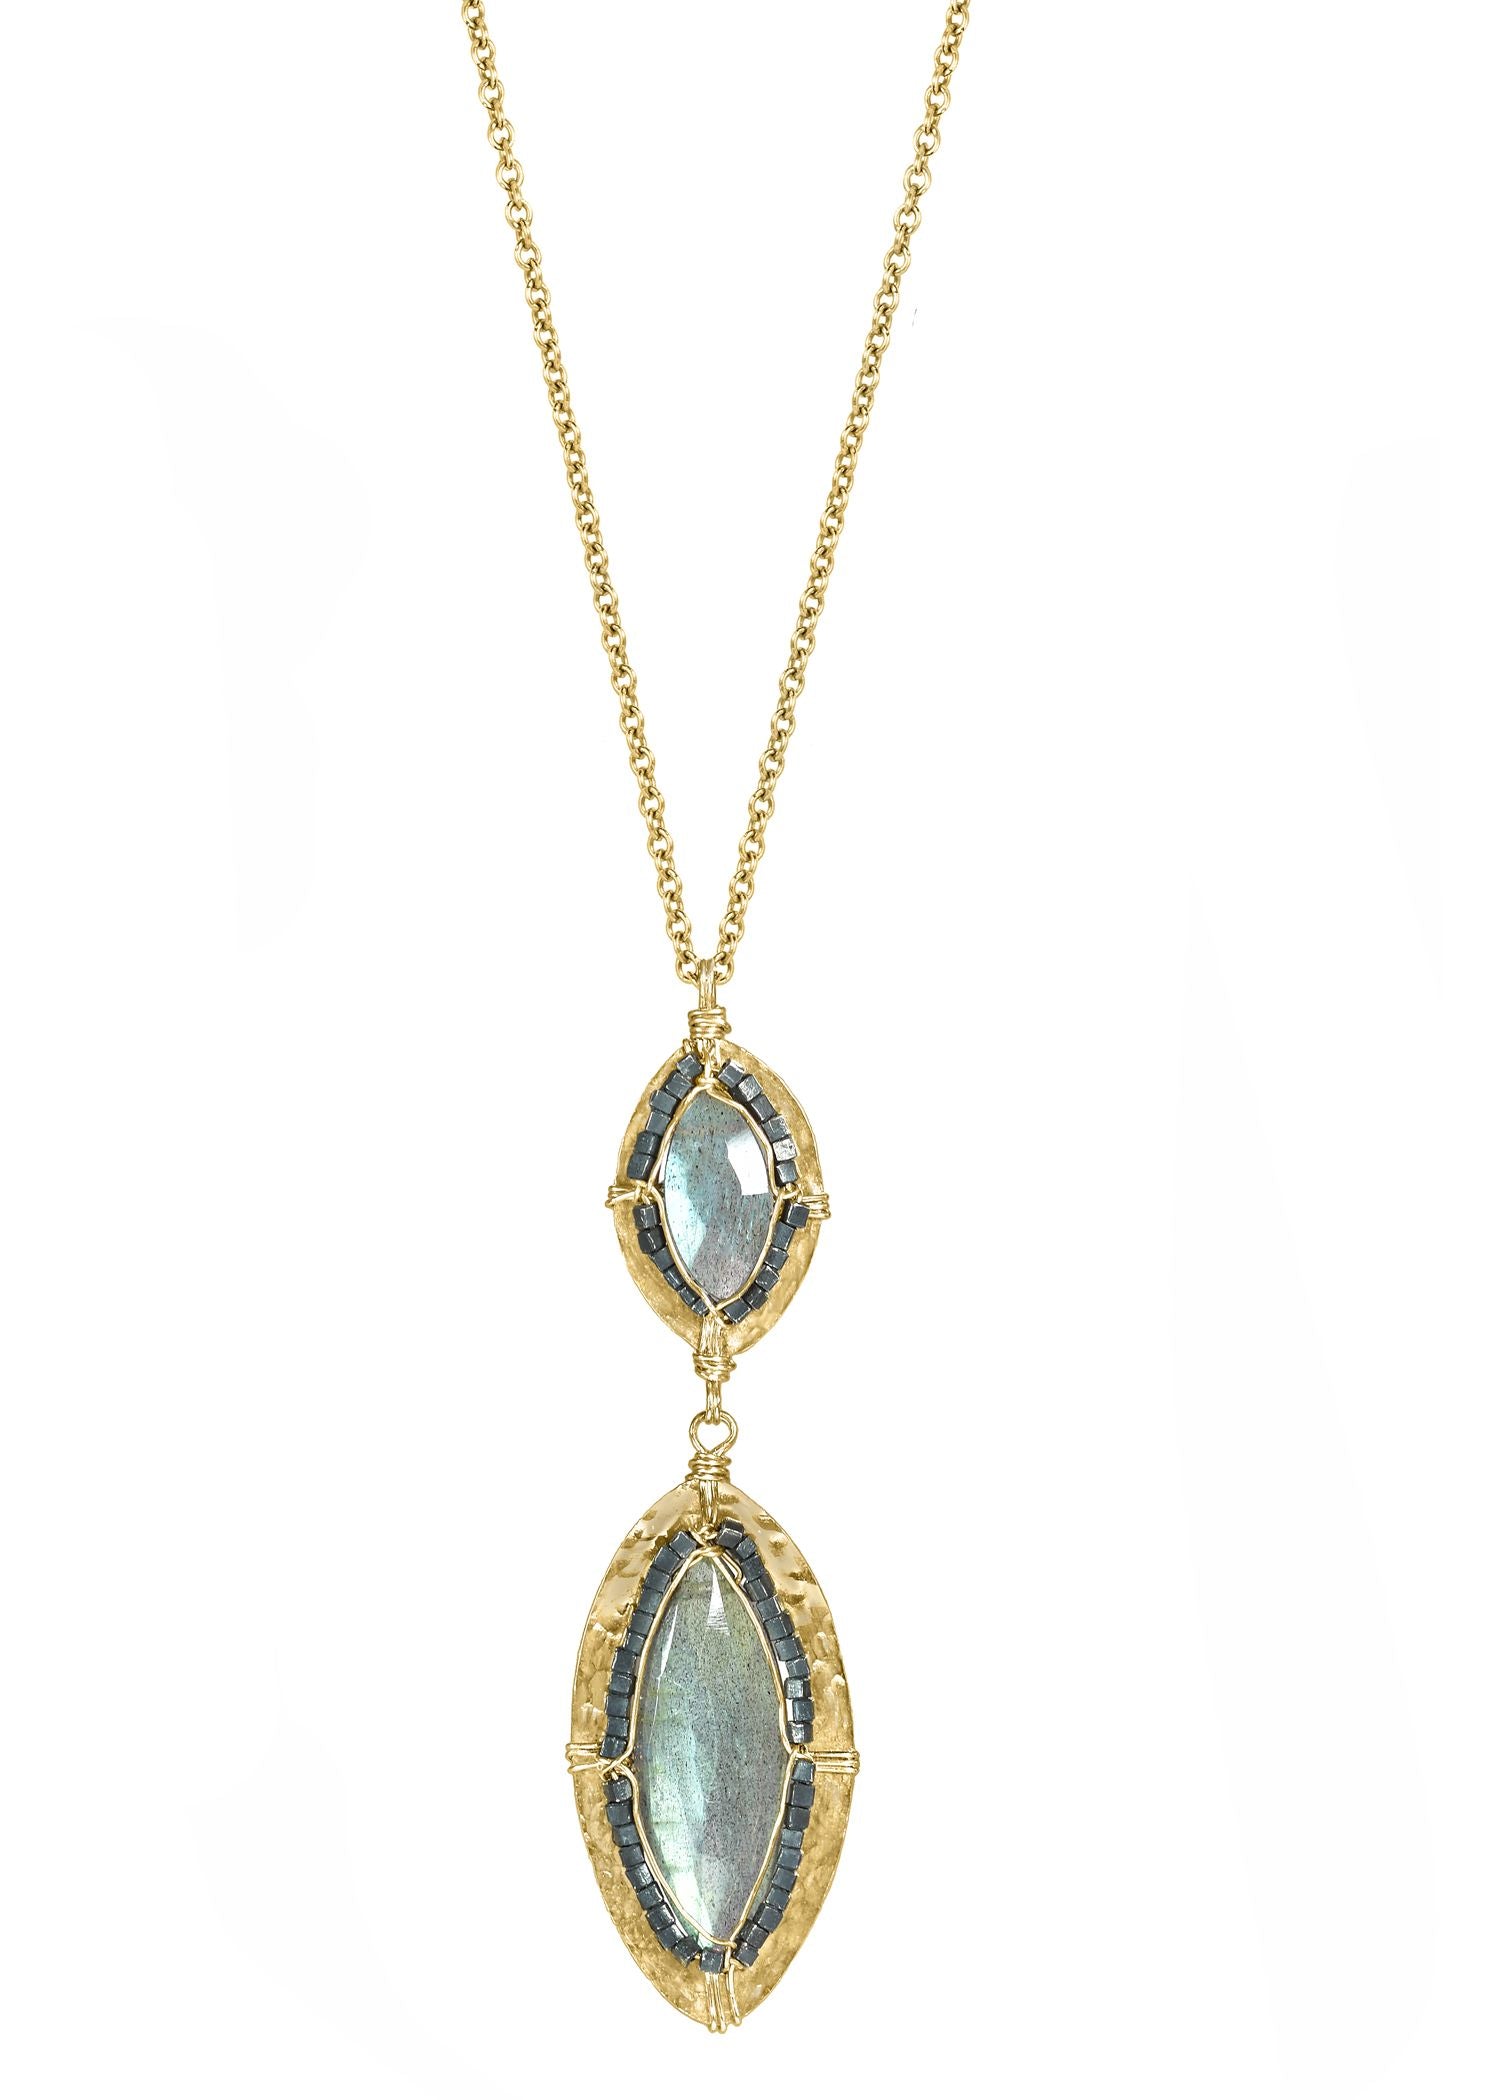 Labradorite 14k gold fill Blackened sterling silver Mixed metal Necklace measures 17-1/4" in length Pendant measures 1-7/8" in length and 1/2" in width Handmade in our Los Angeles studio